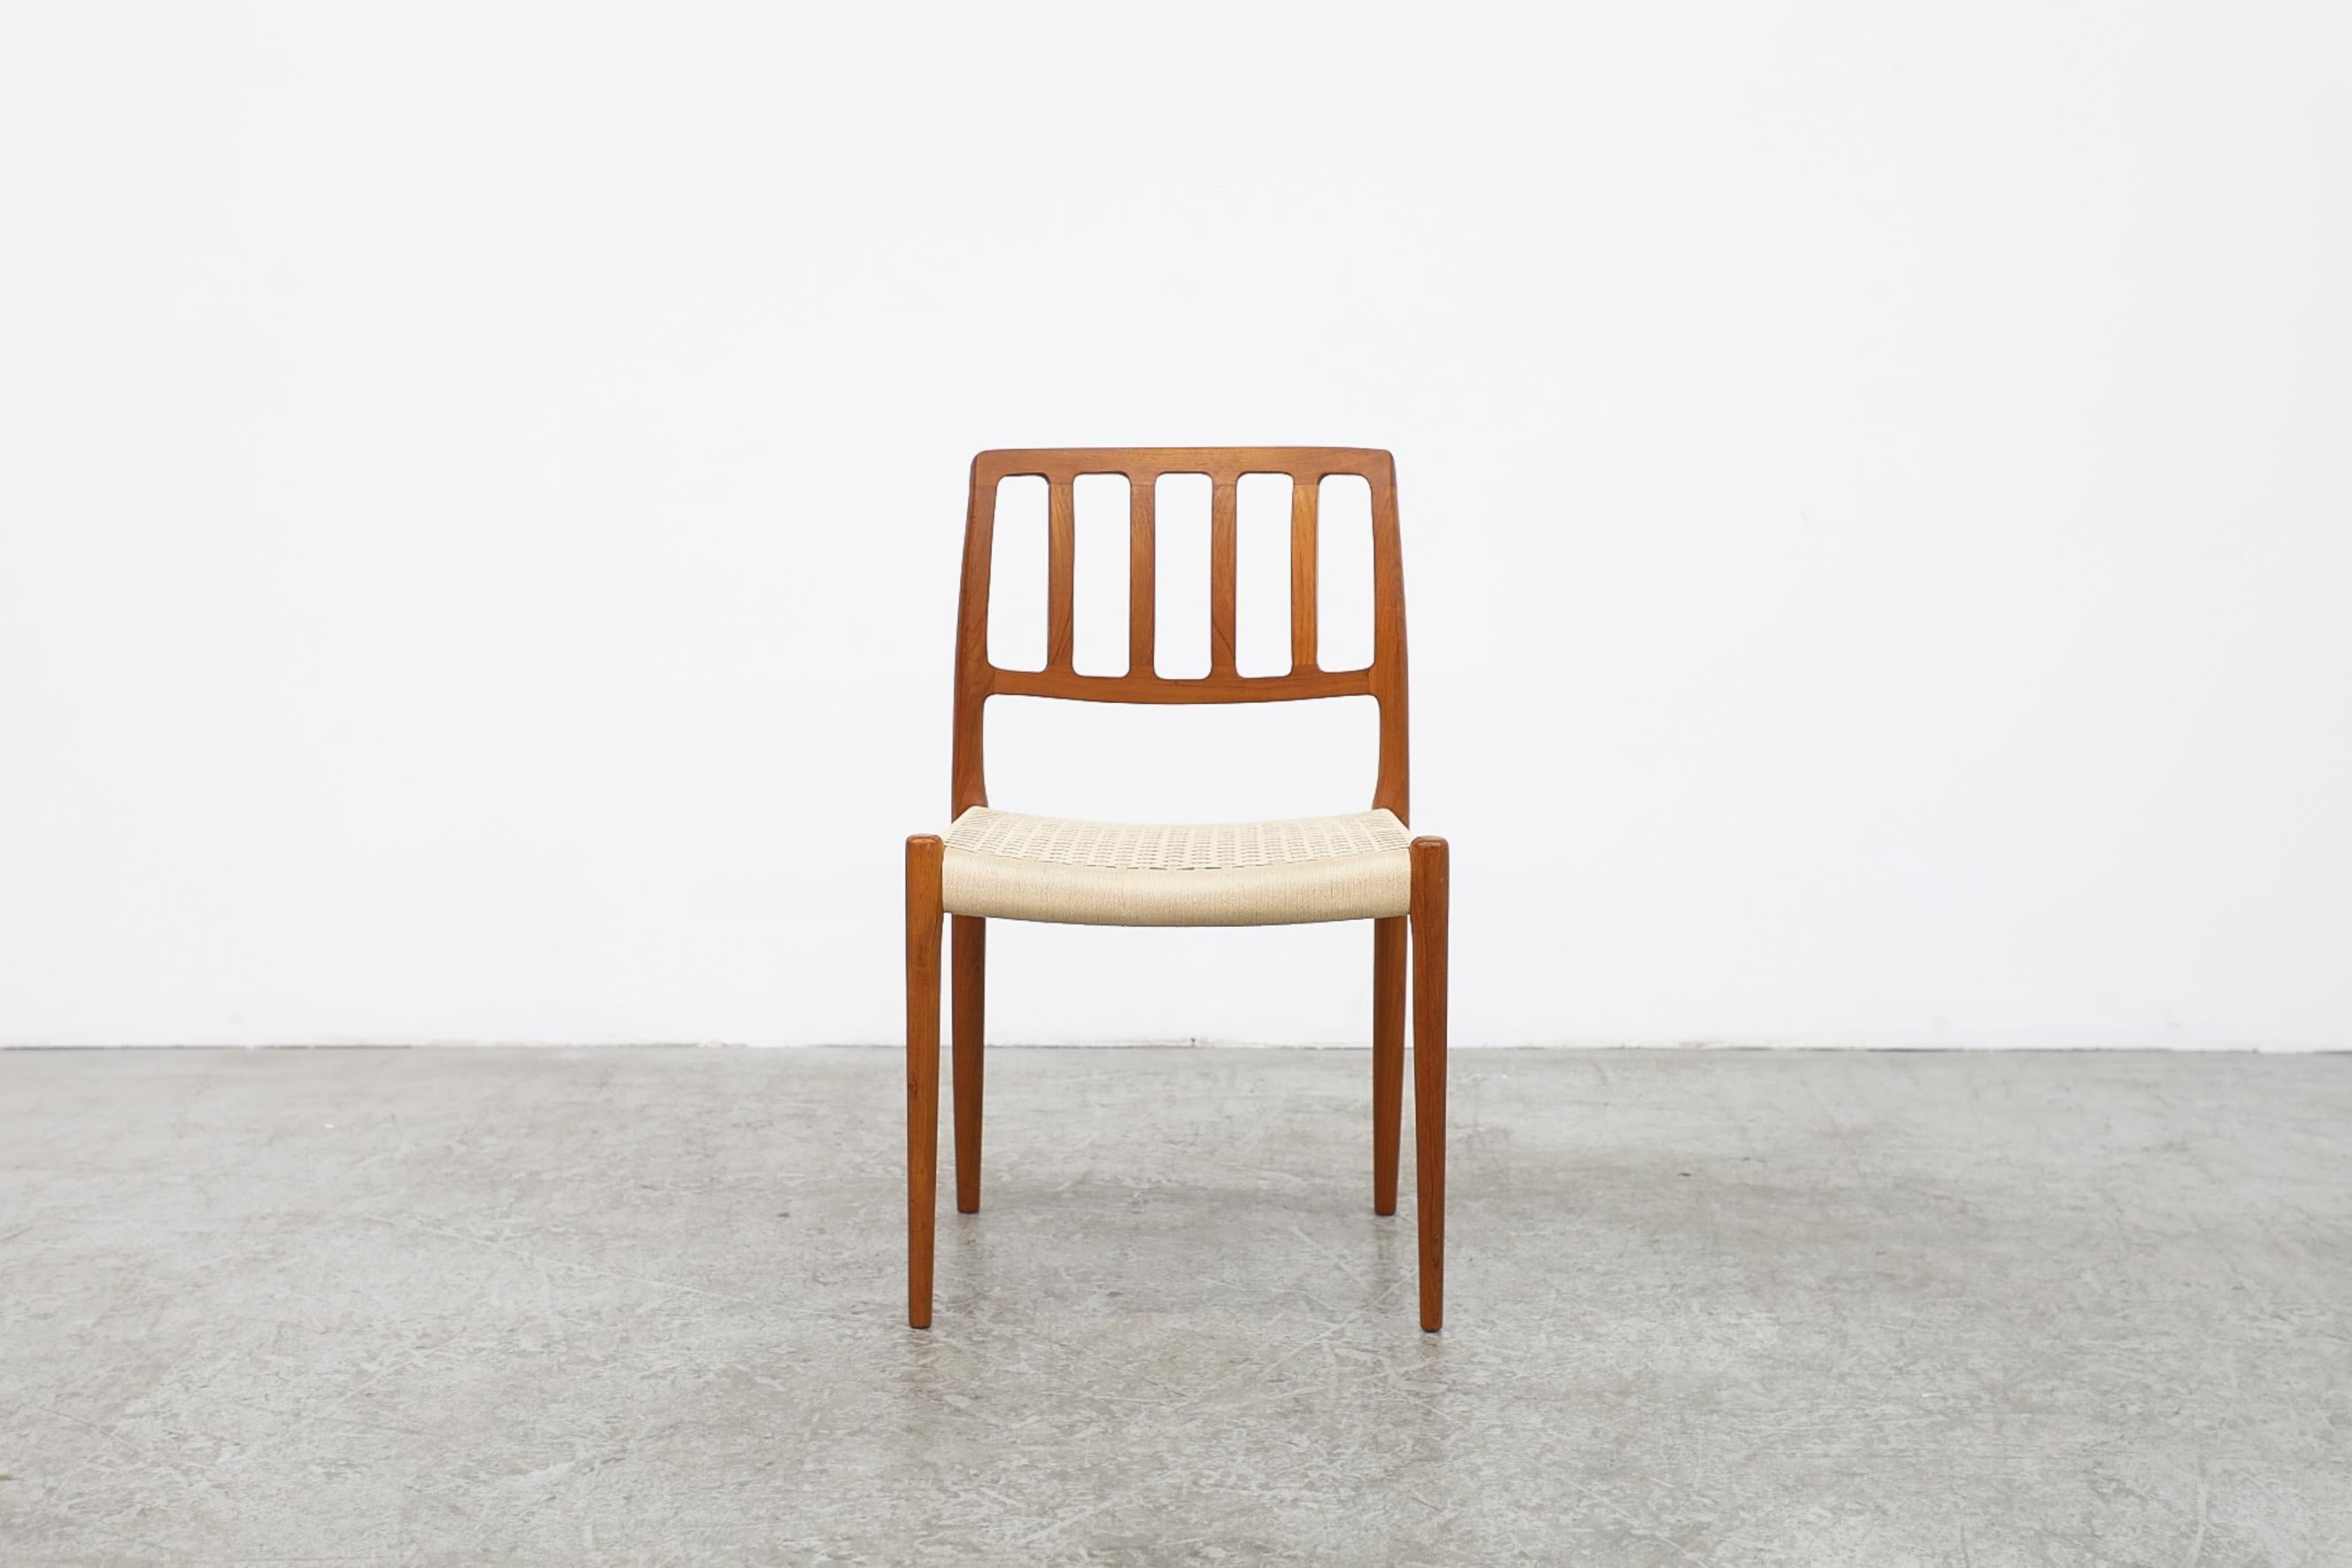 This 1970s Niels Moller Model 83 Chair has a teak frame and woven off white seat. In good original condition with wear consistent with it age and use. Other similar chairs available, listed separately. (S401)